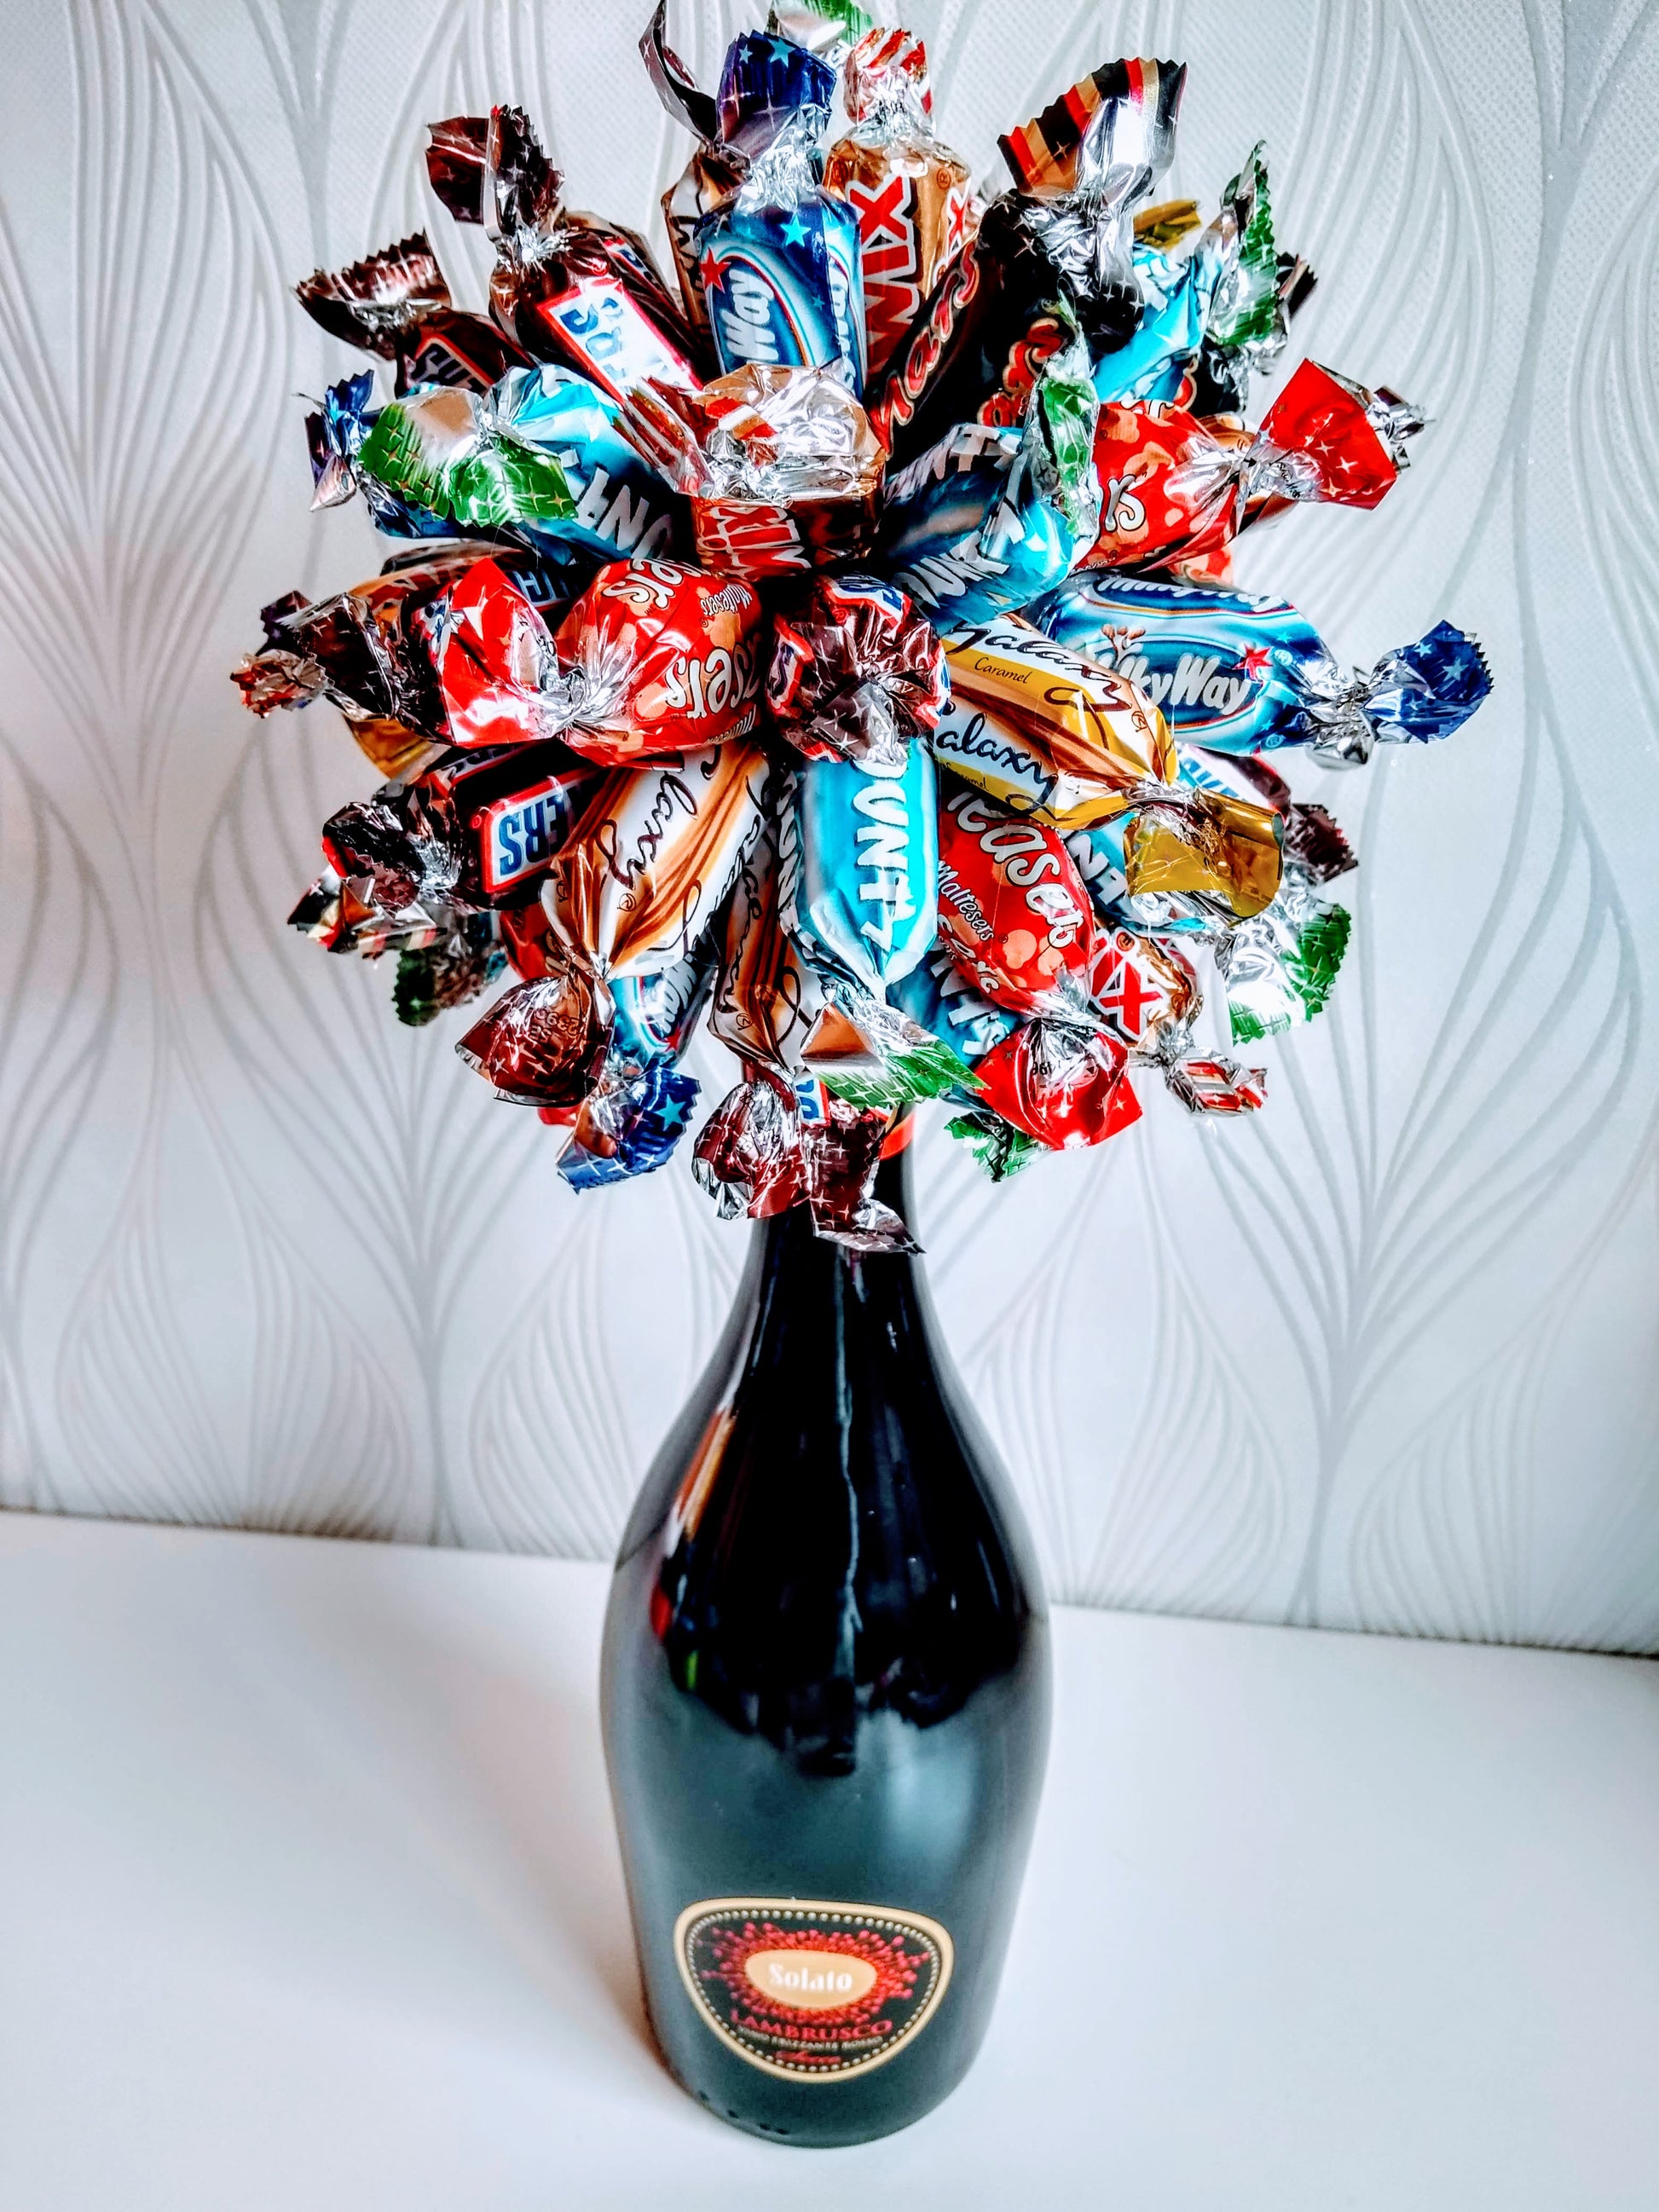 Luxury Prosecco and Celebrations Chocolate Bouquets with personalised message